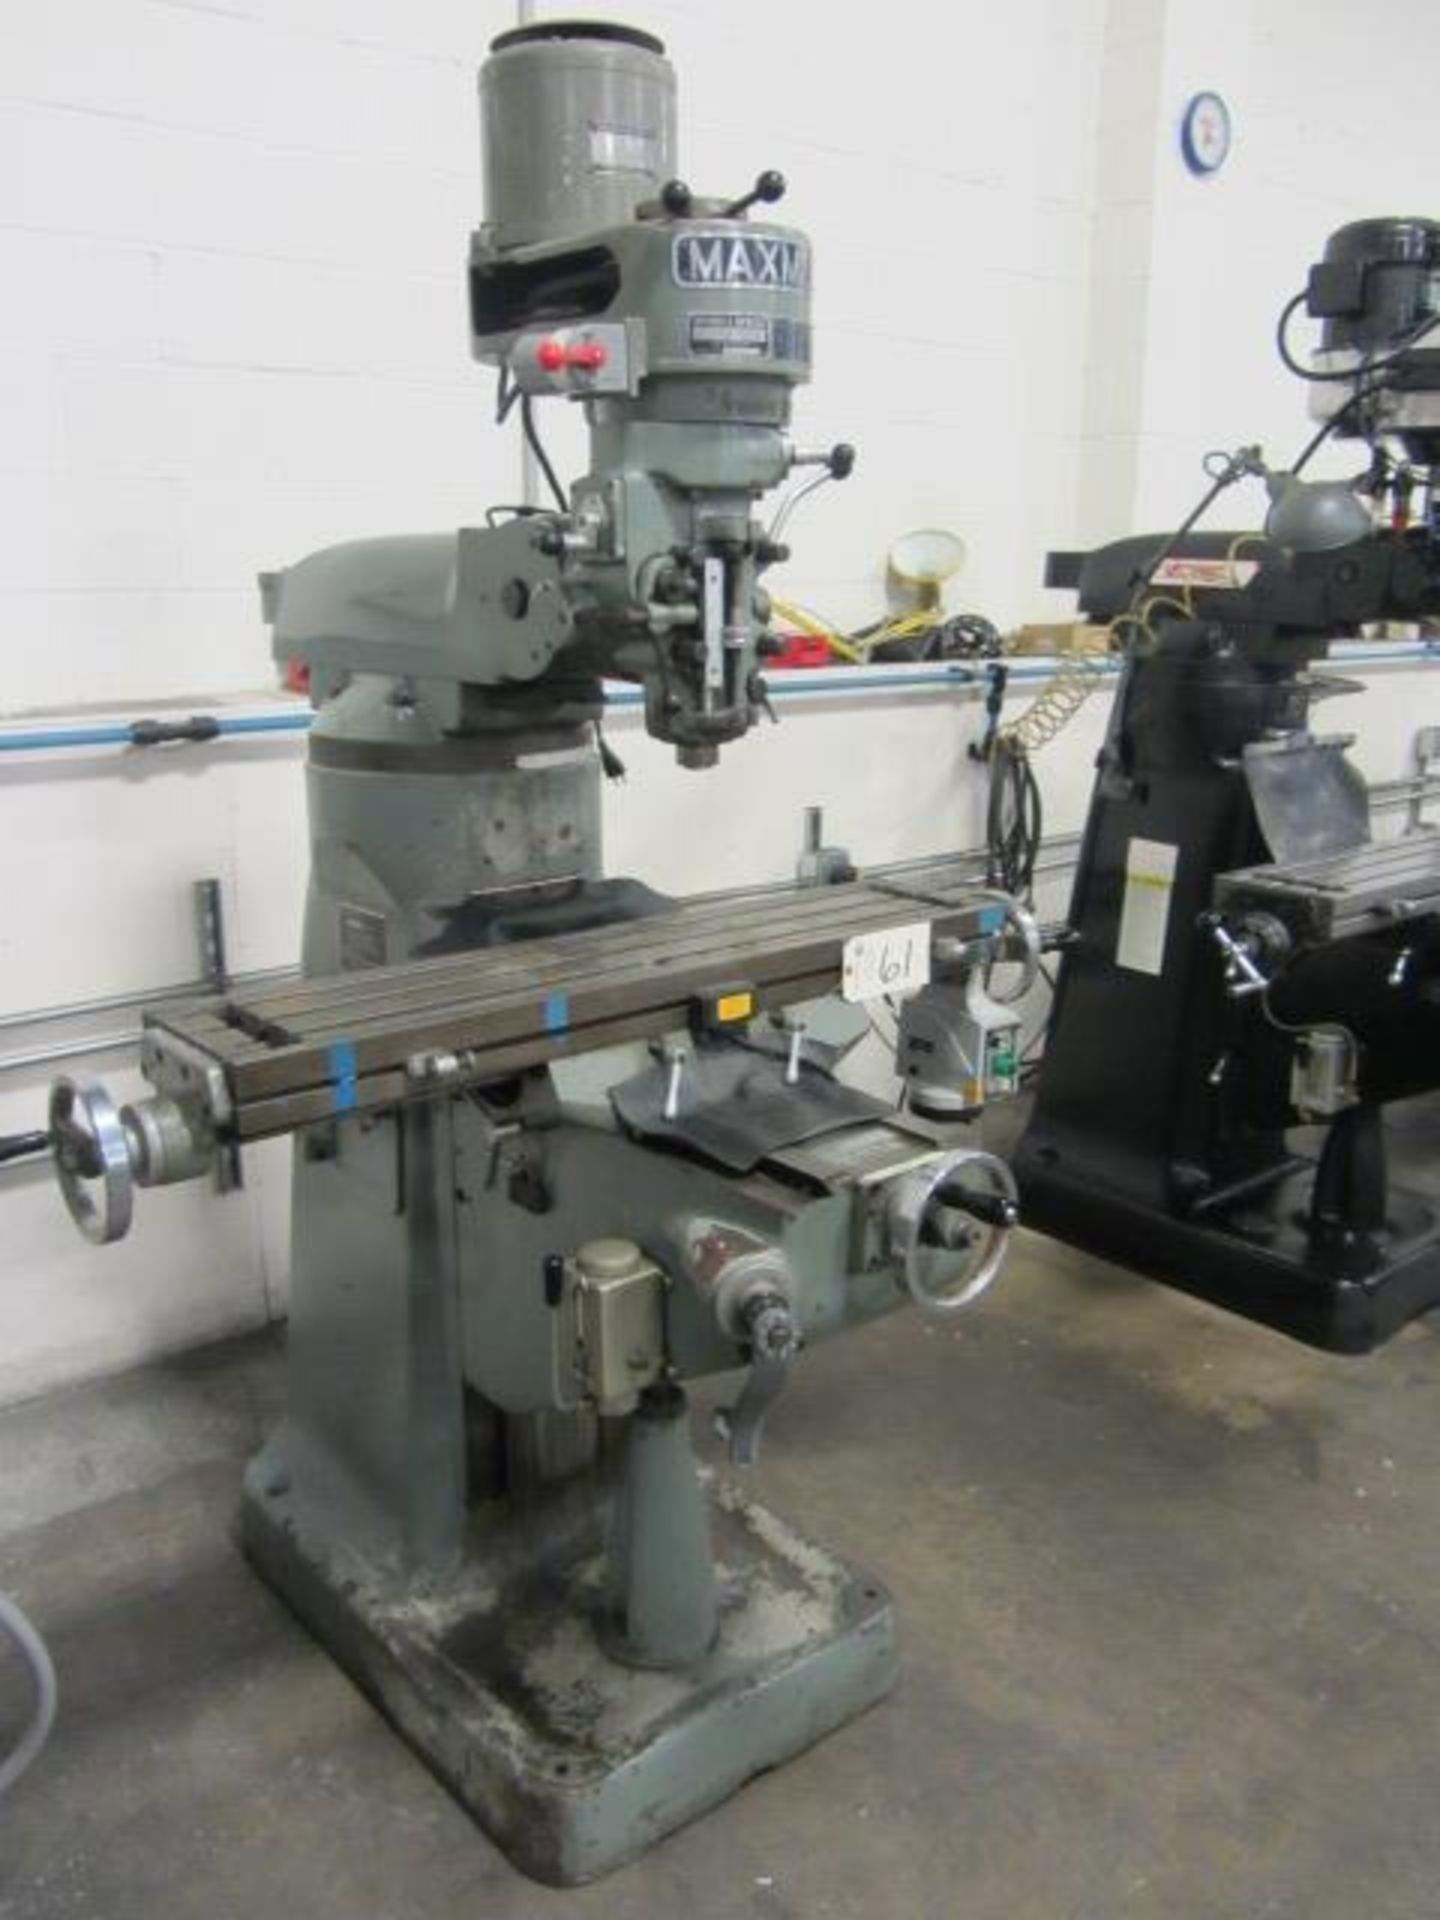 Maxmill Vertical Milling Machine with 9'' x 42'' Power Feed Table, R-8 Spindle Speeds to 2720 RPM, - Image 4 of 6